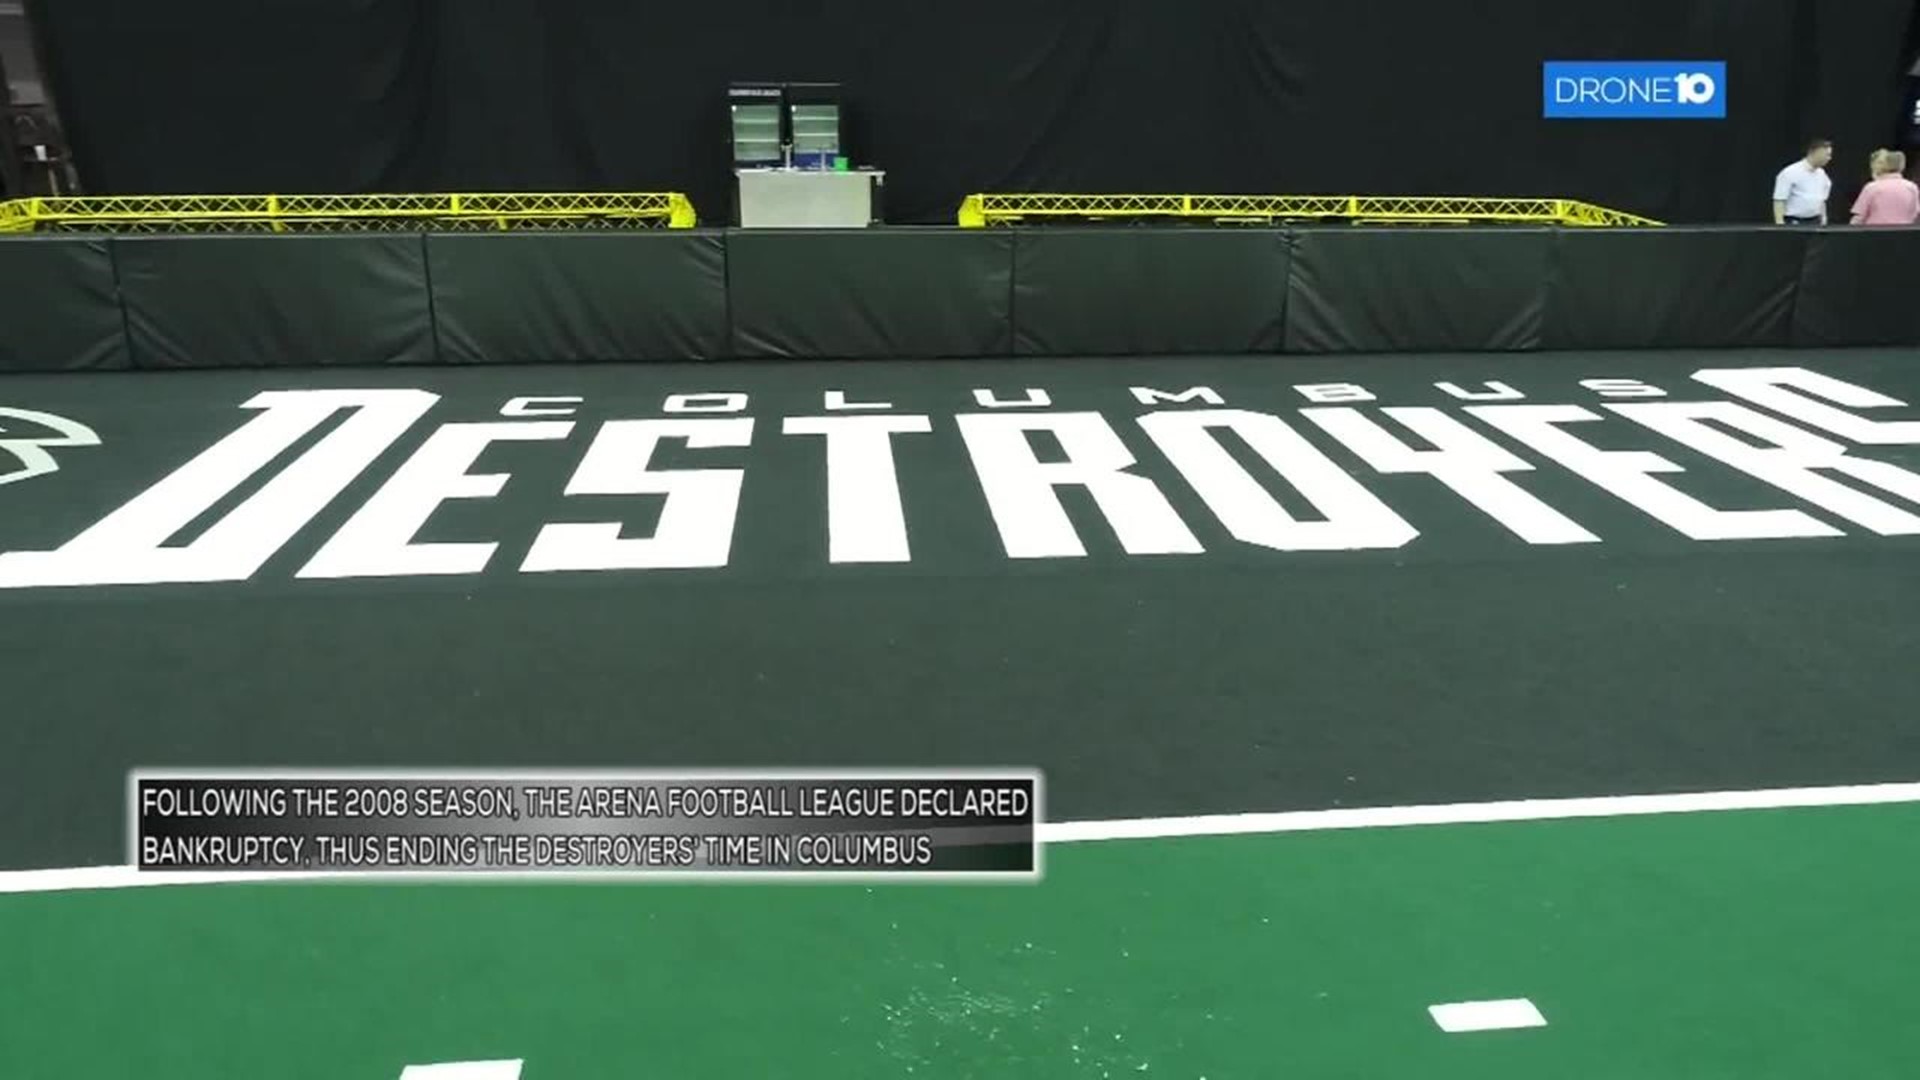 Drone 10: Columbus Destroyers field at Nationwide Arena